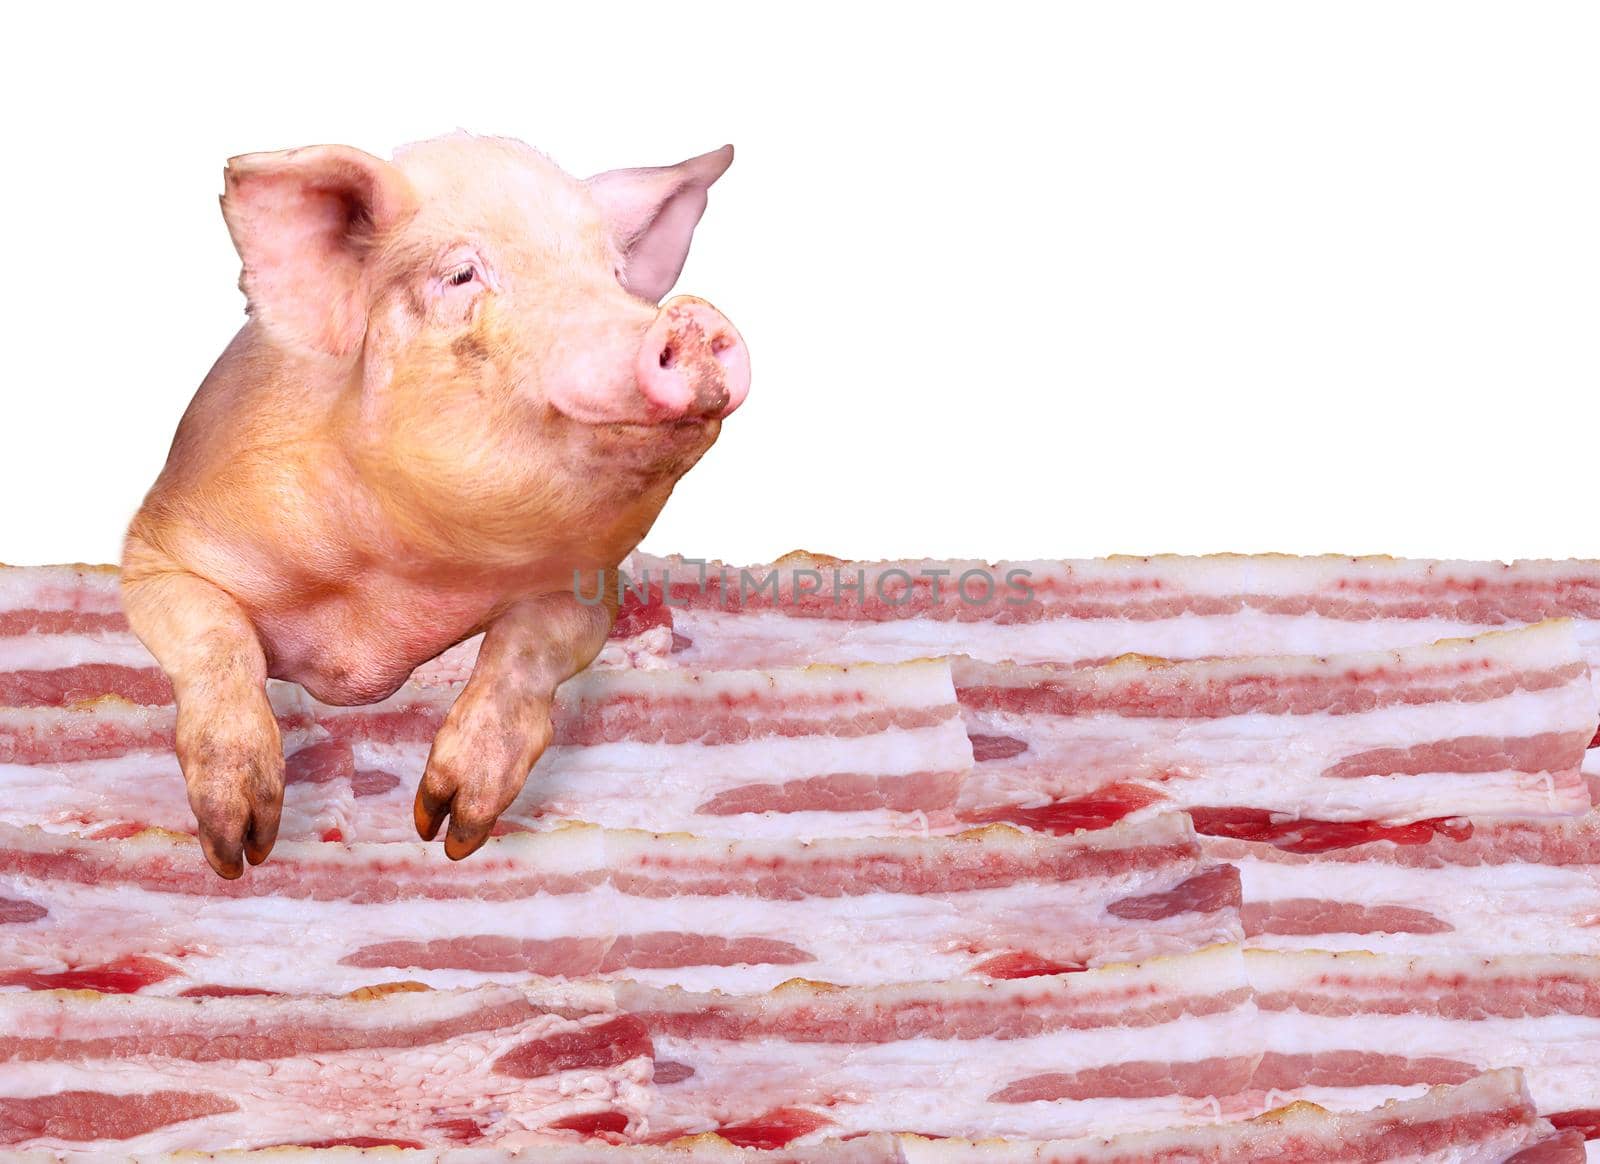 Pig looks out over the layers of lards on the white background. Sign-board for butcher's shop